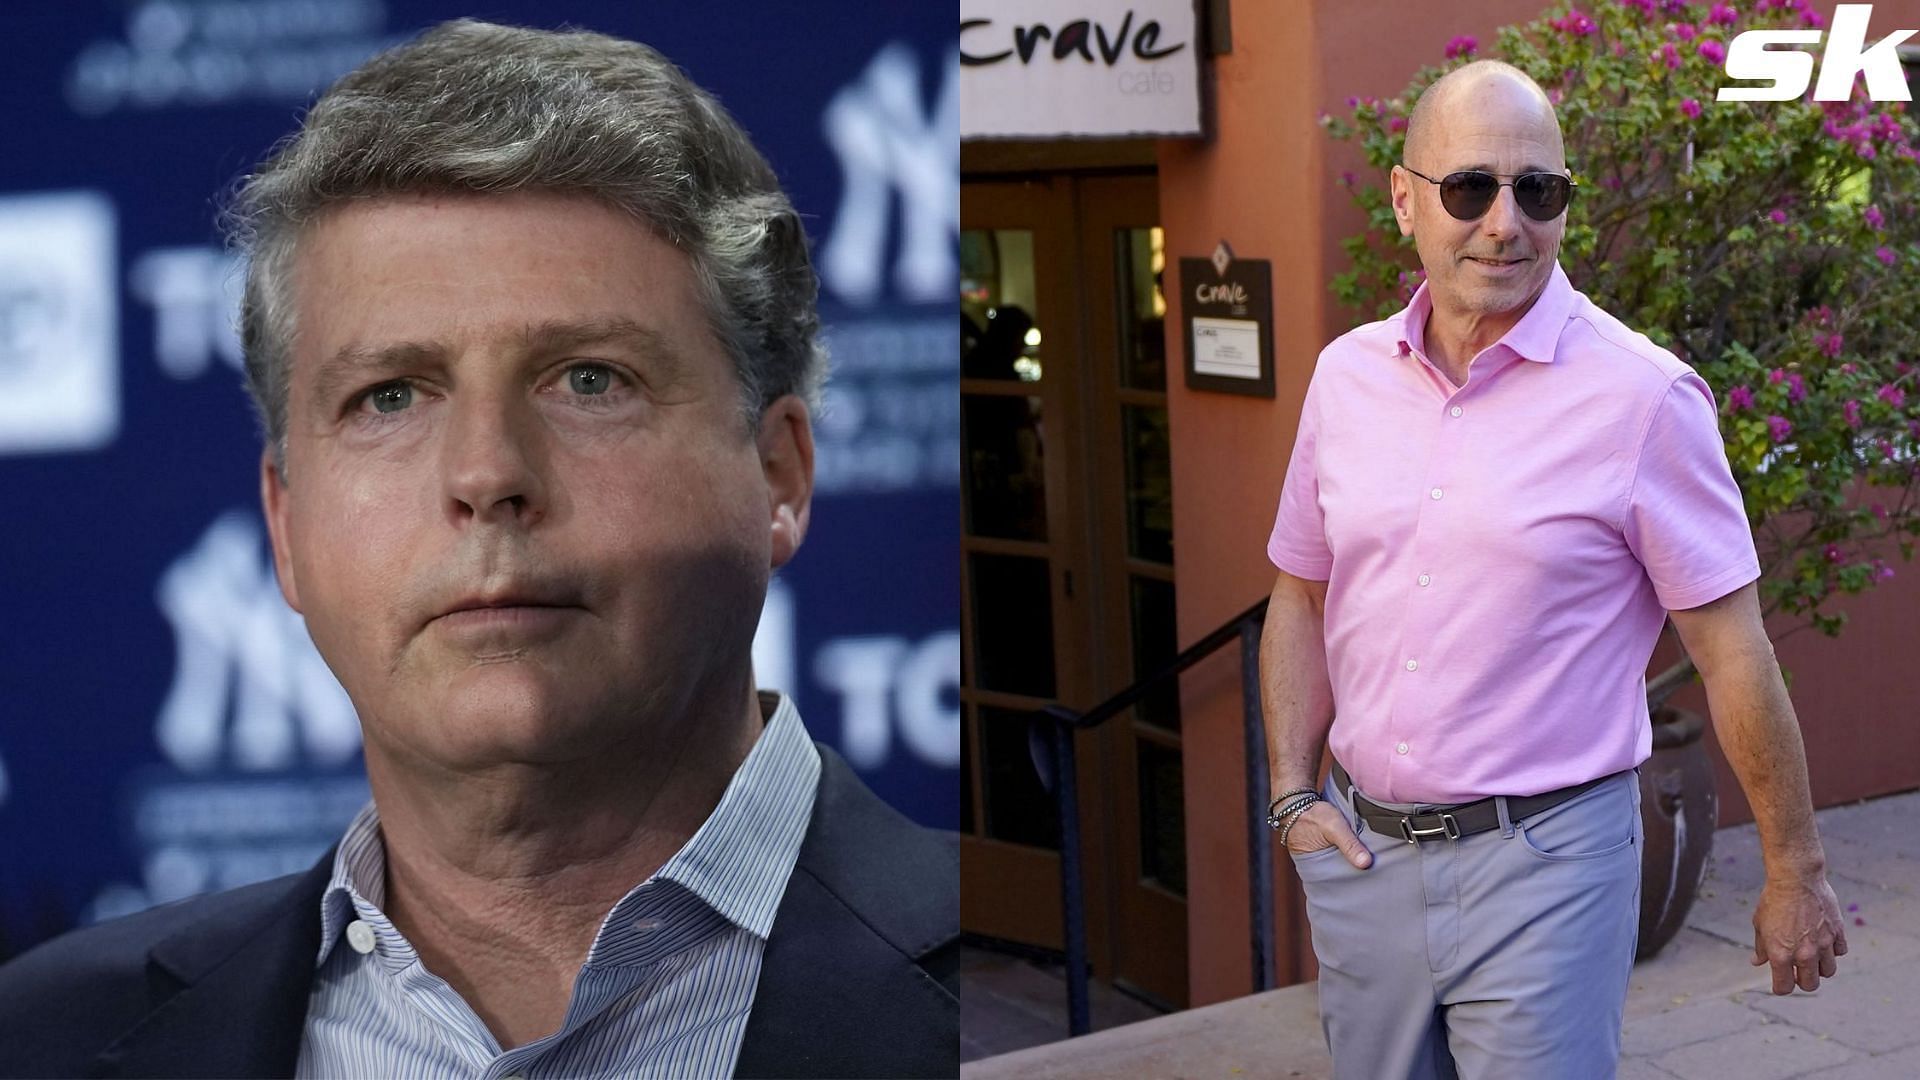 Yankees GM Brian Cashman accepts star players&rsquo; direct access to owner Hal Steinbrenner